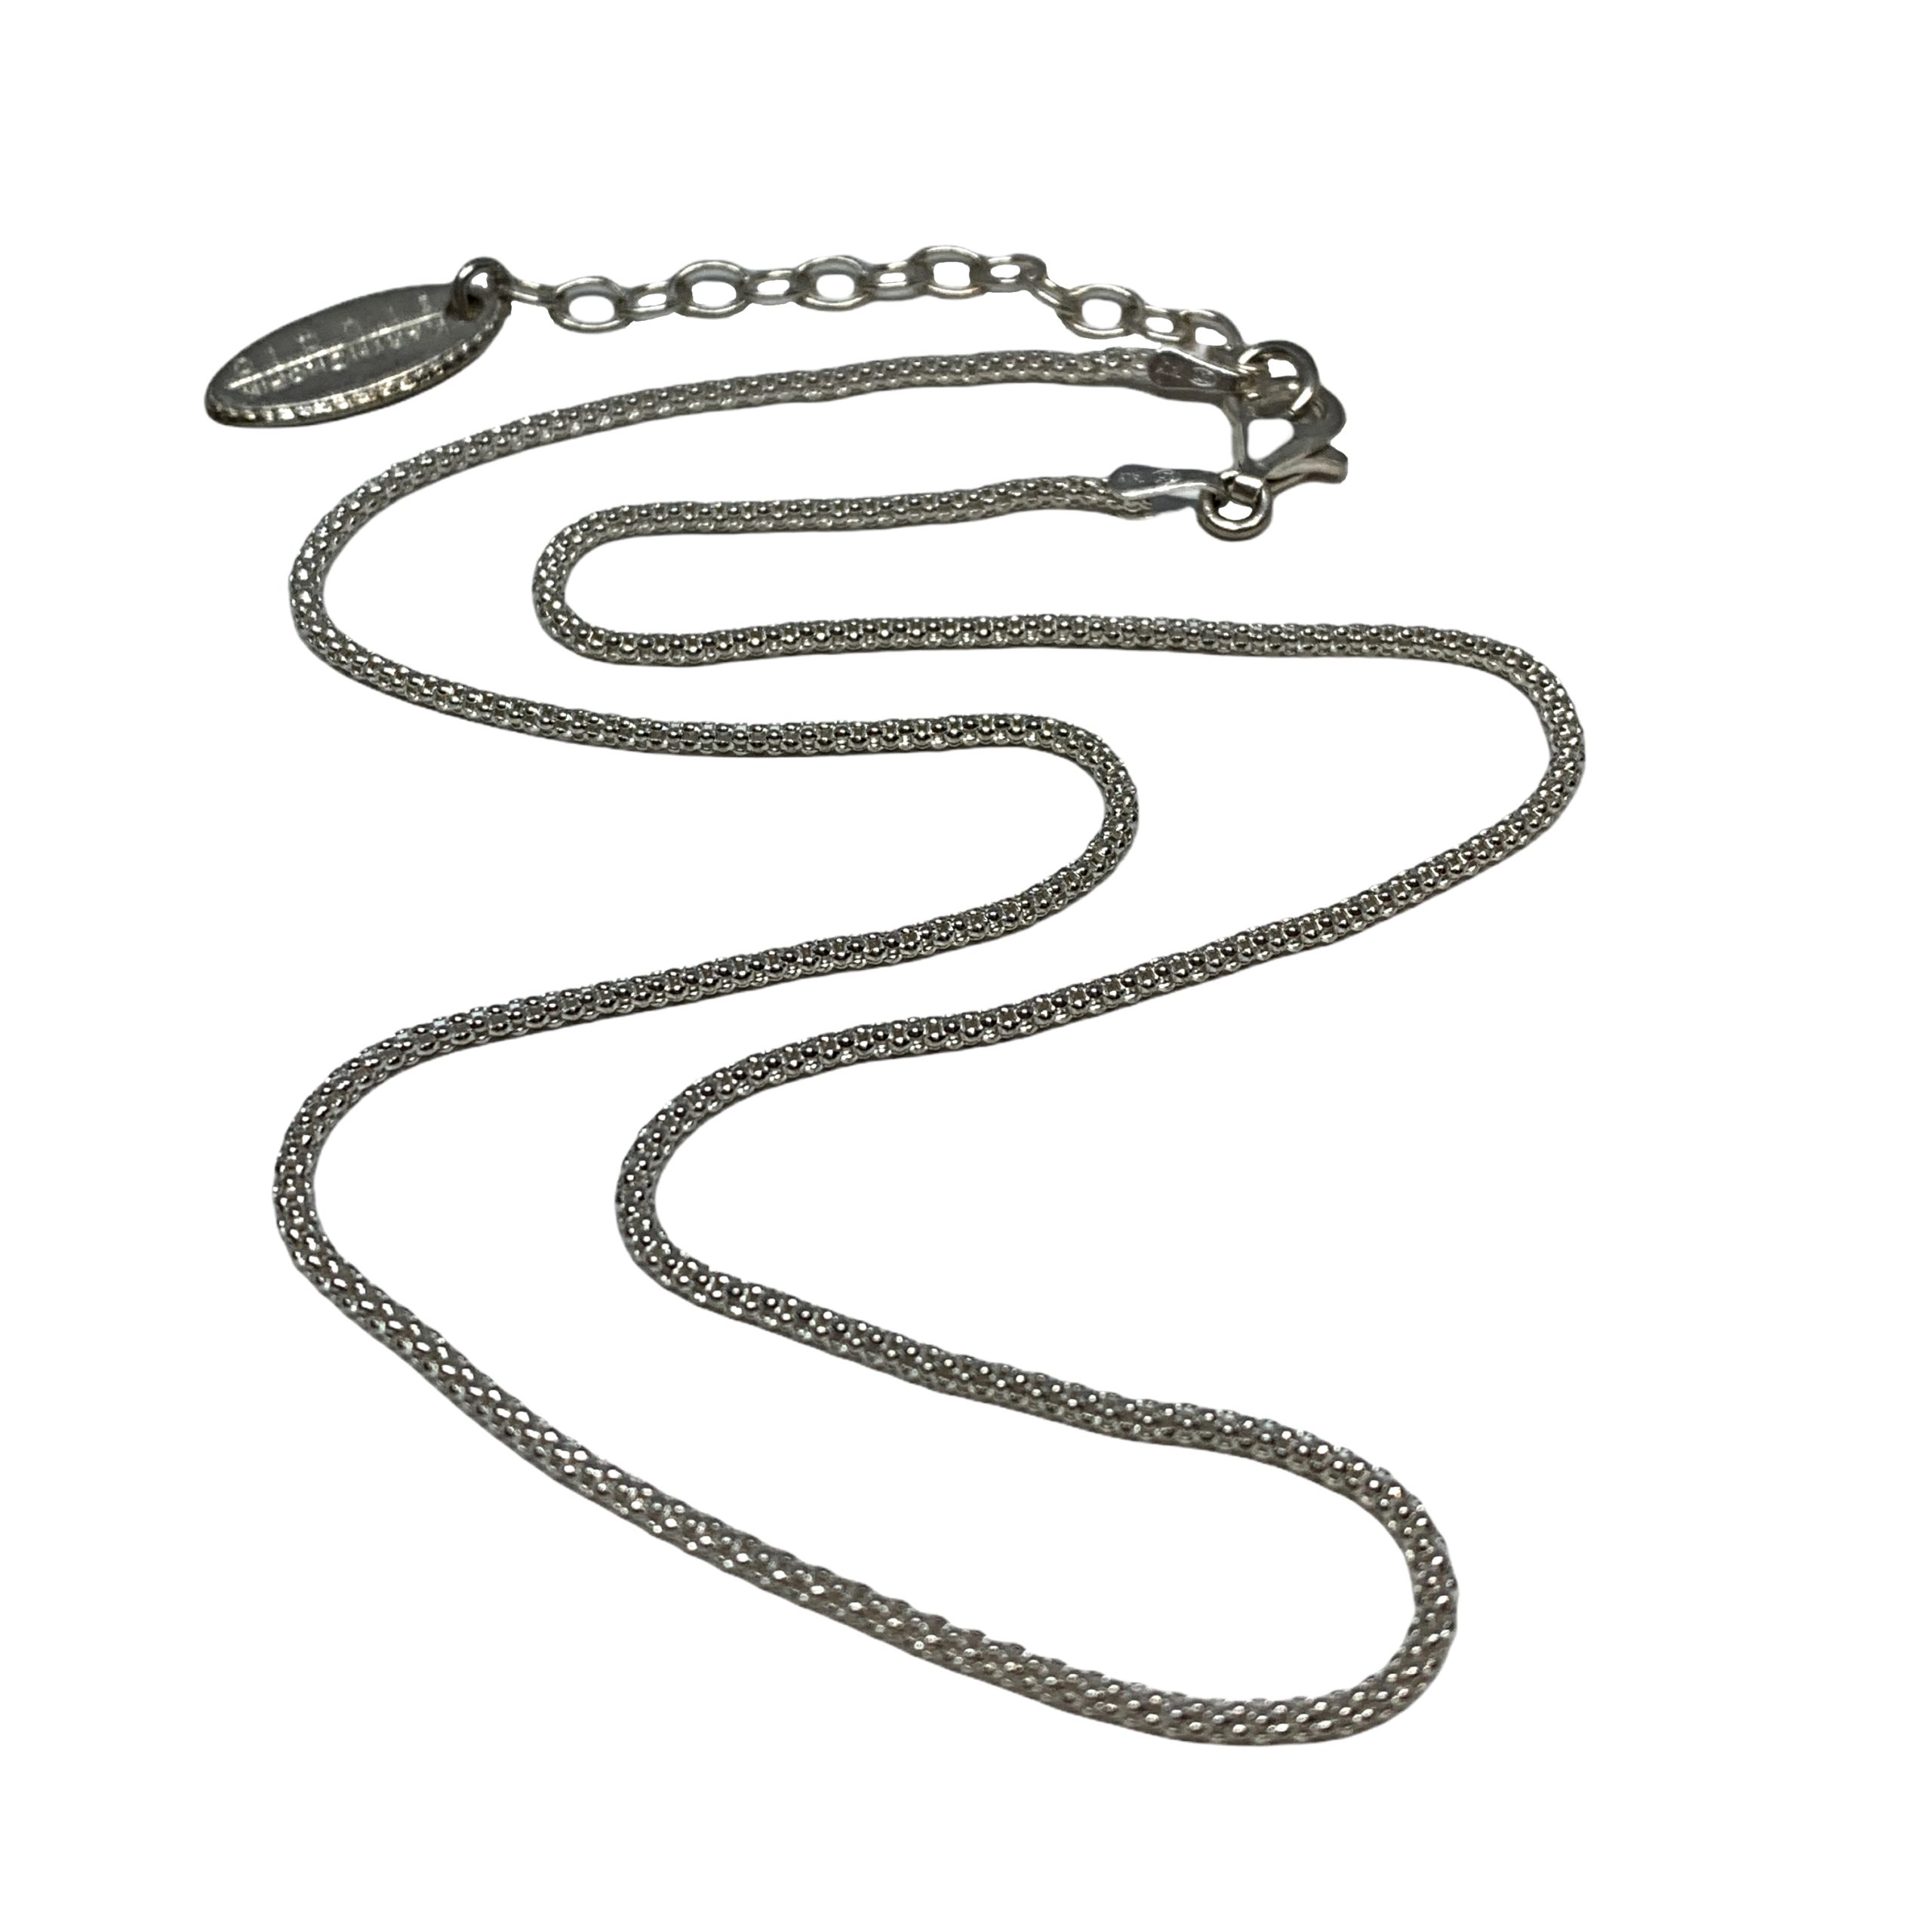 Sterling silver chain by Karyn Chopik | Effusion Art Gallery + Cast Glass Studio, Invermere BC